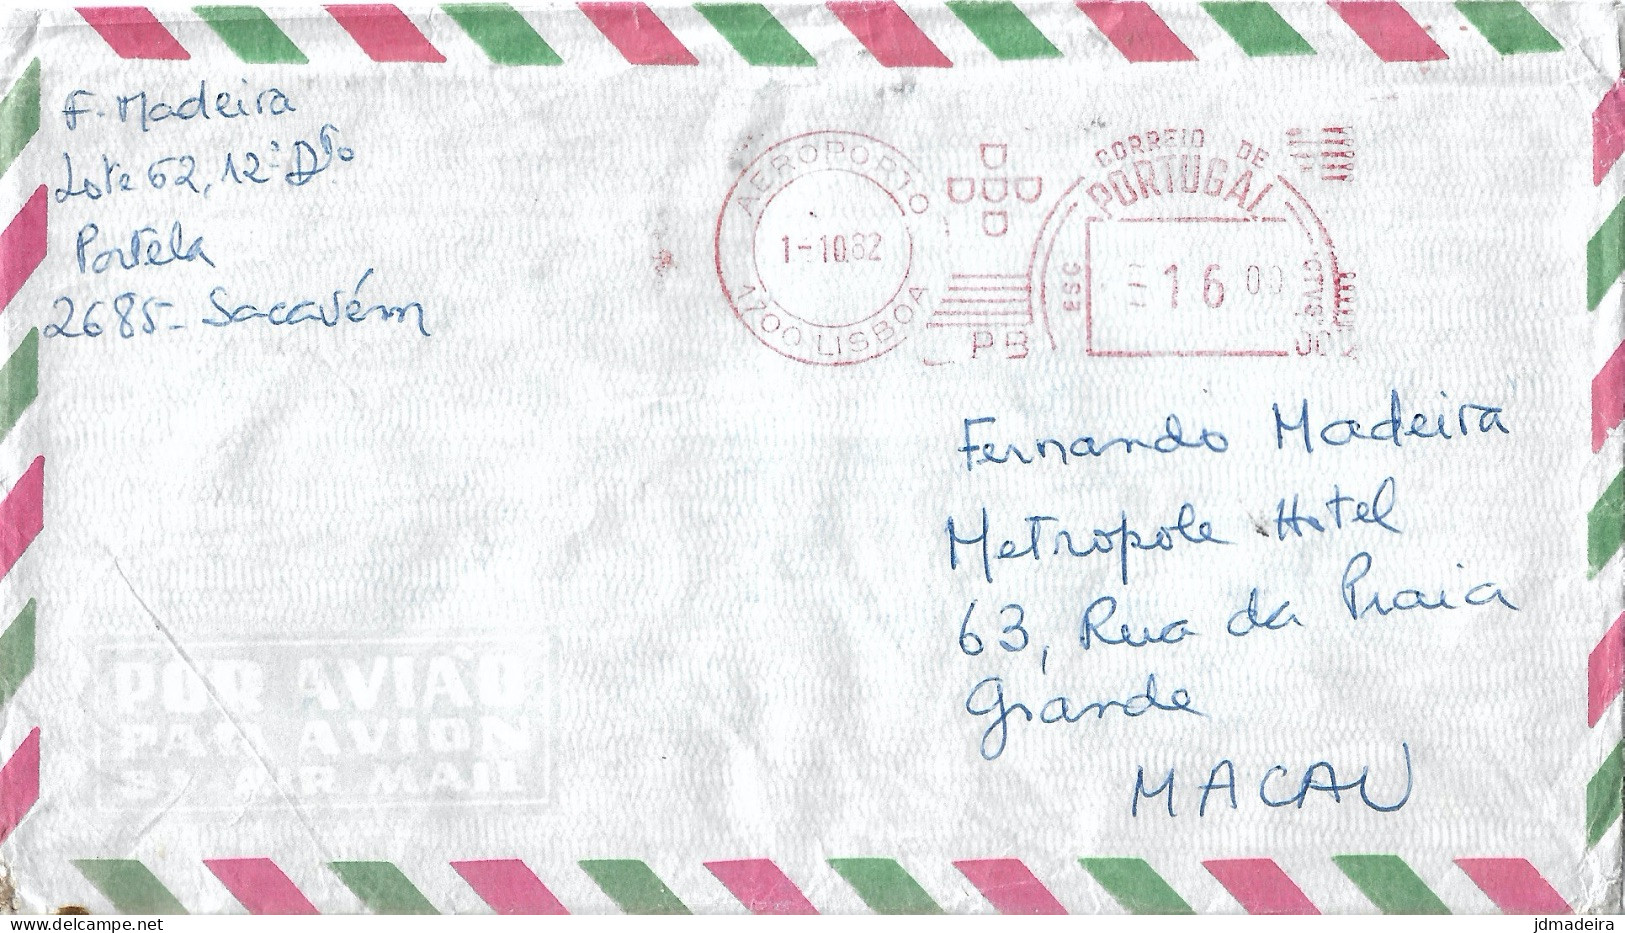 MACAU MACAO Incoming Mail With Portugal Meter Stamp - Covers & Documents